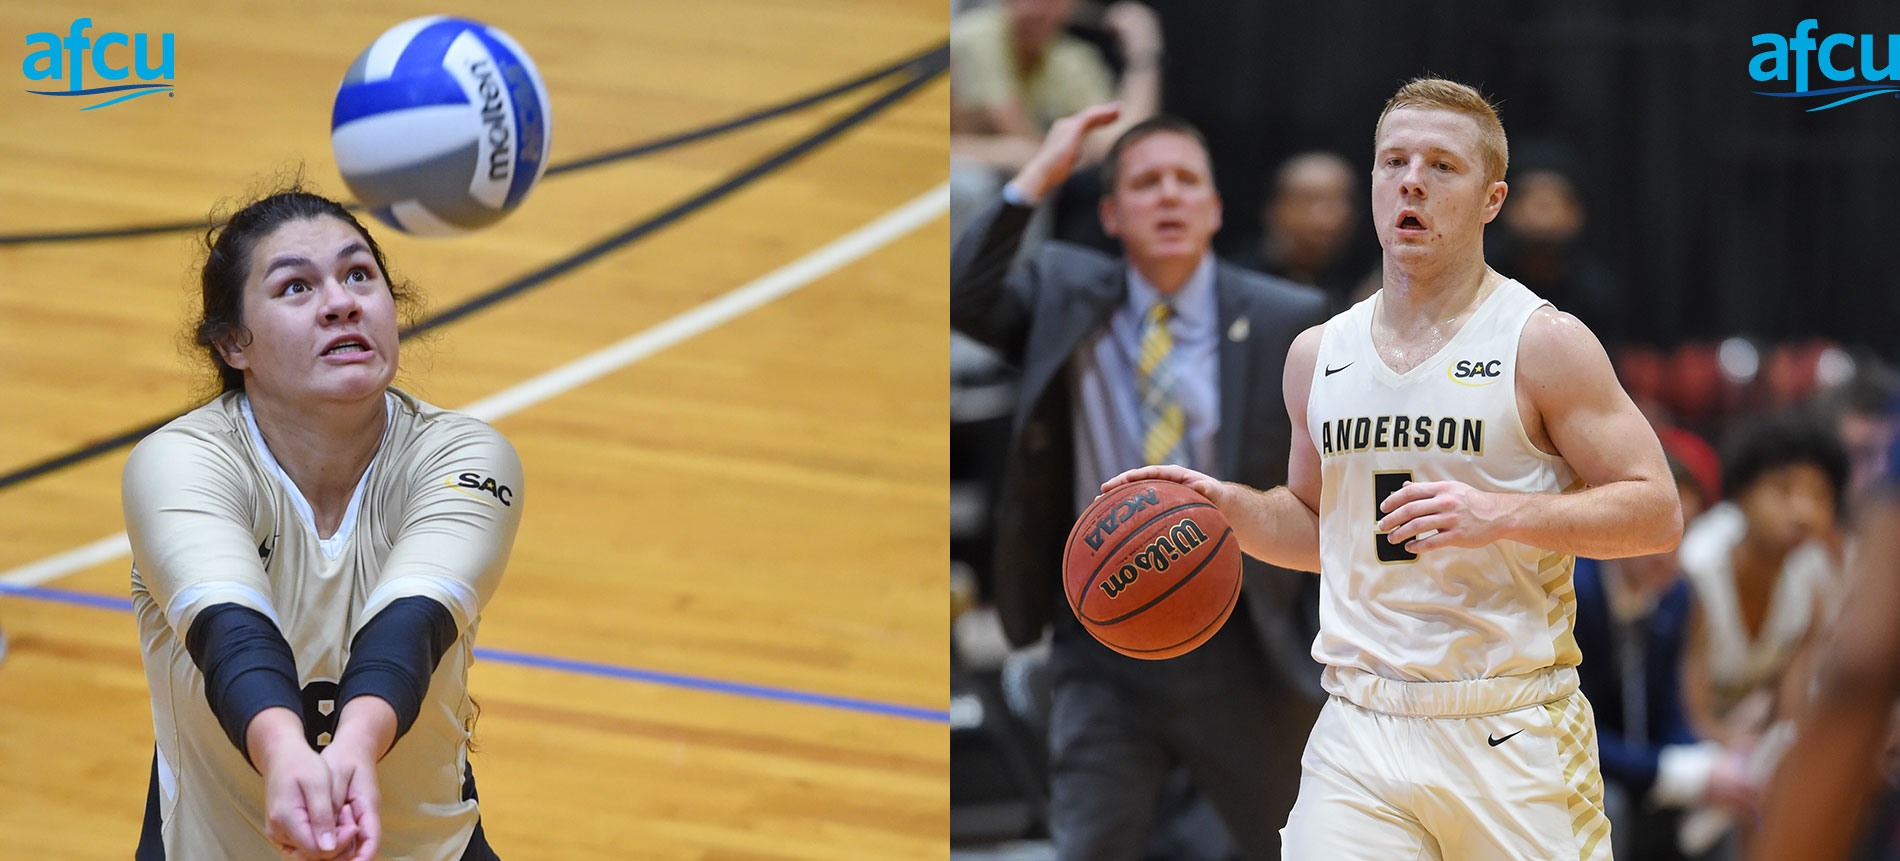 Men’s Basketball’s Quin Nottingham and Volleyball’s Emily Conlin Named to the AFCU Gold Standard